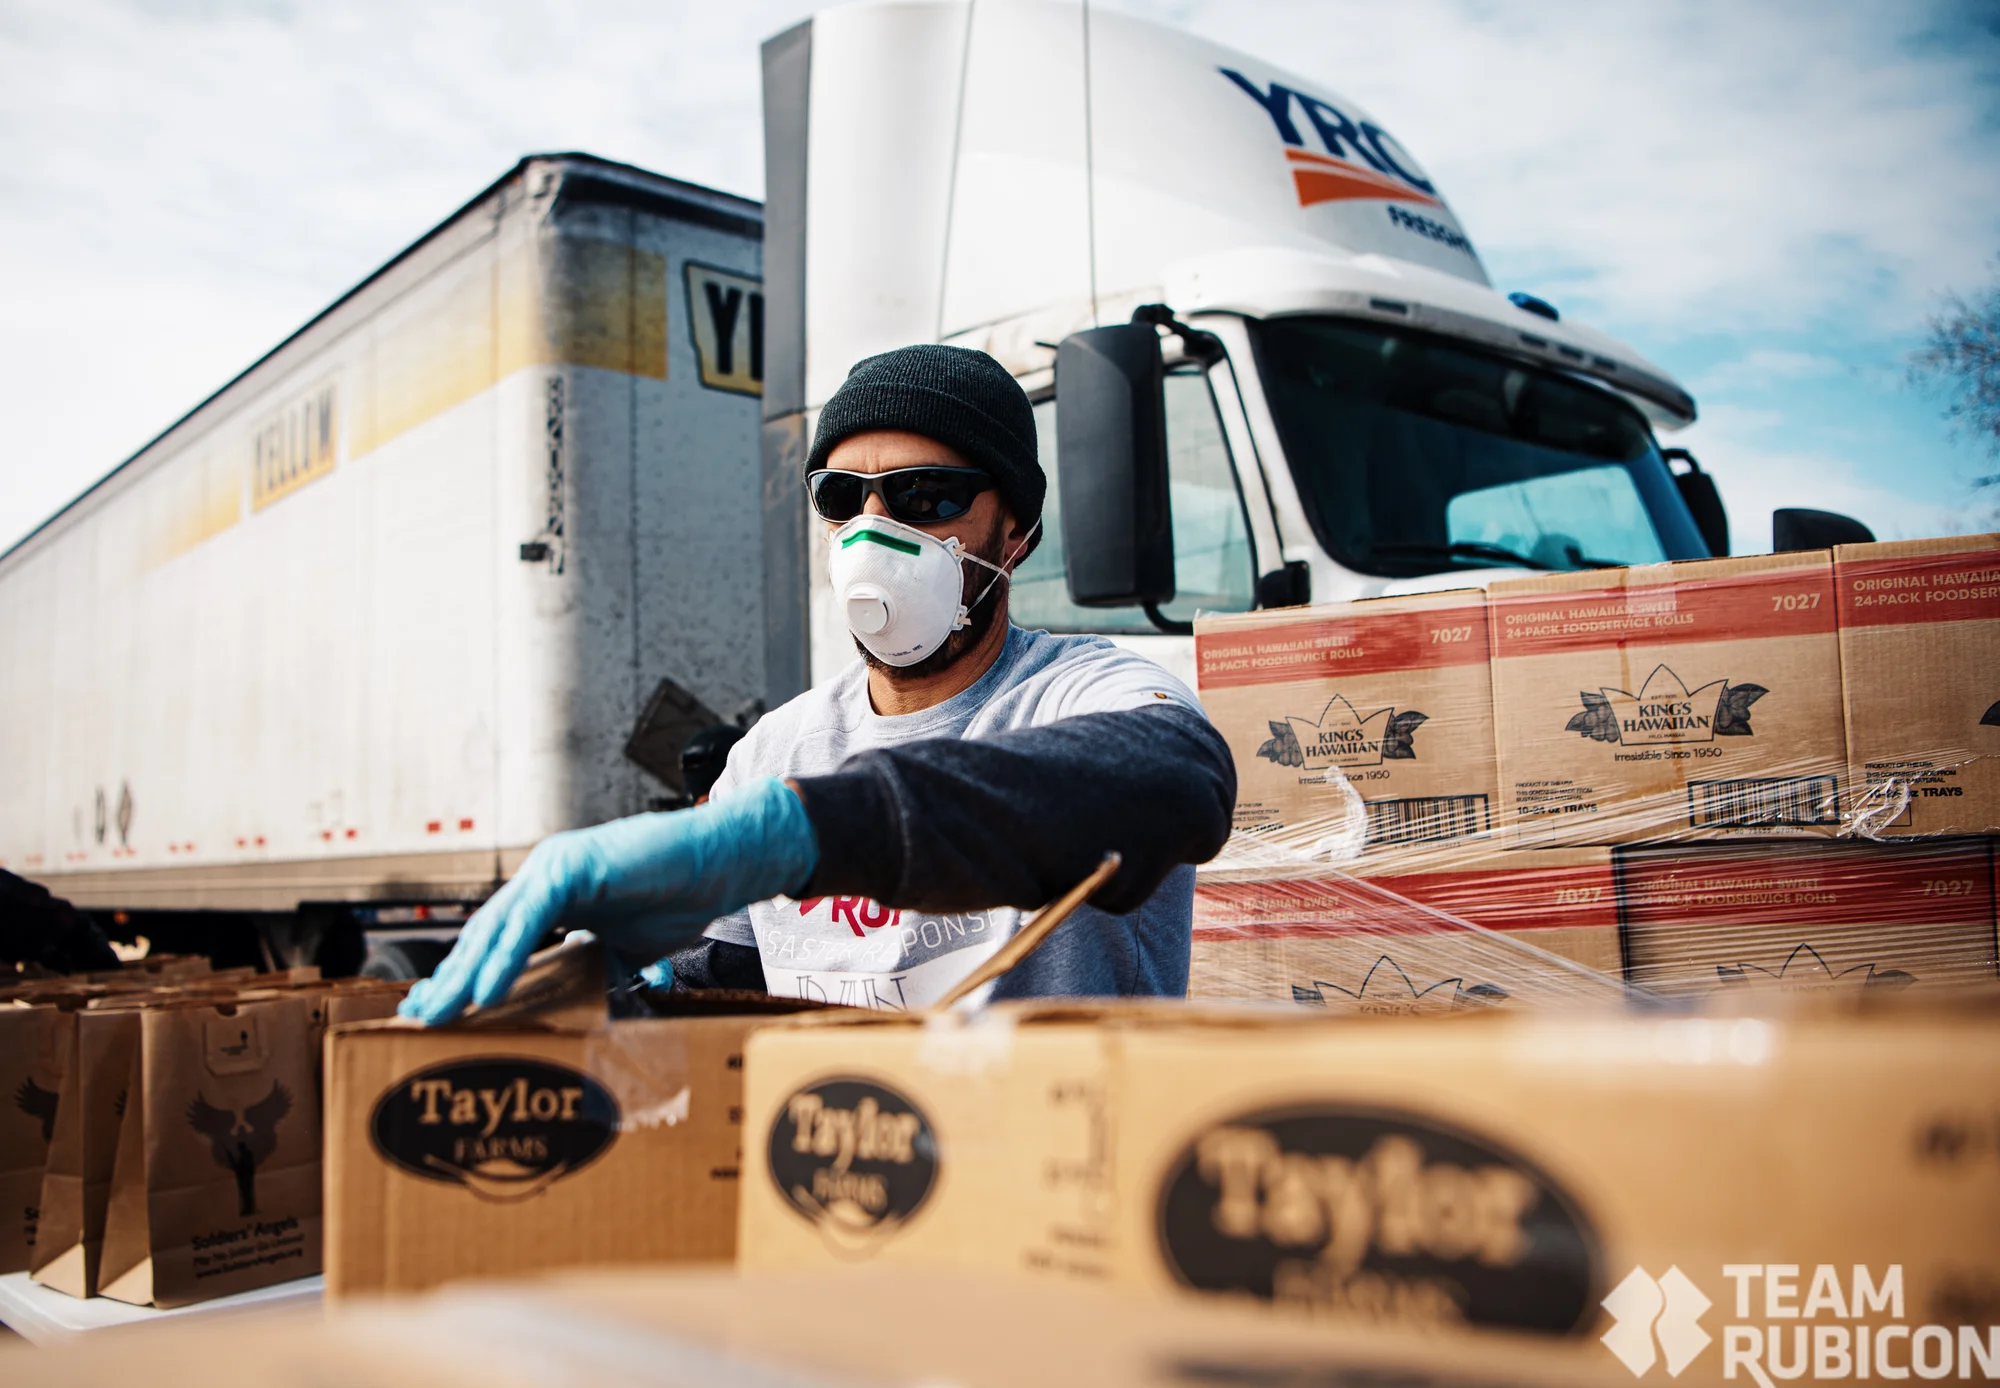 A volunteer wearing mask organizes a pile of boxes in front of a semi truck.